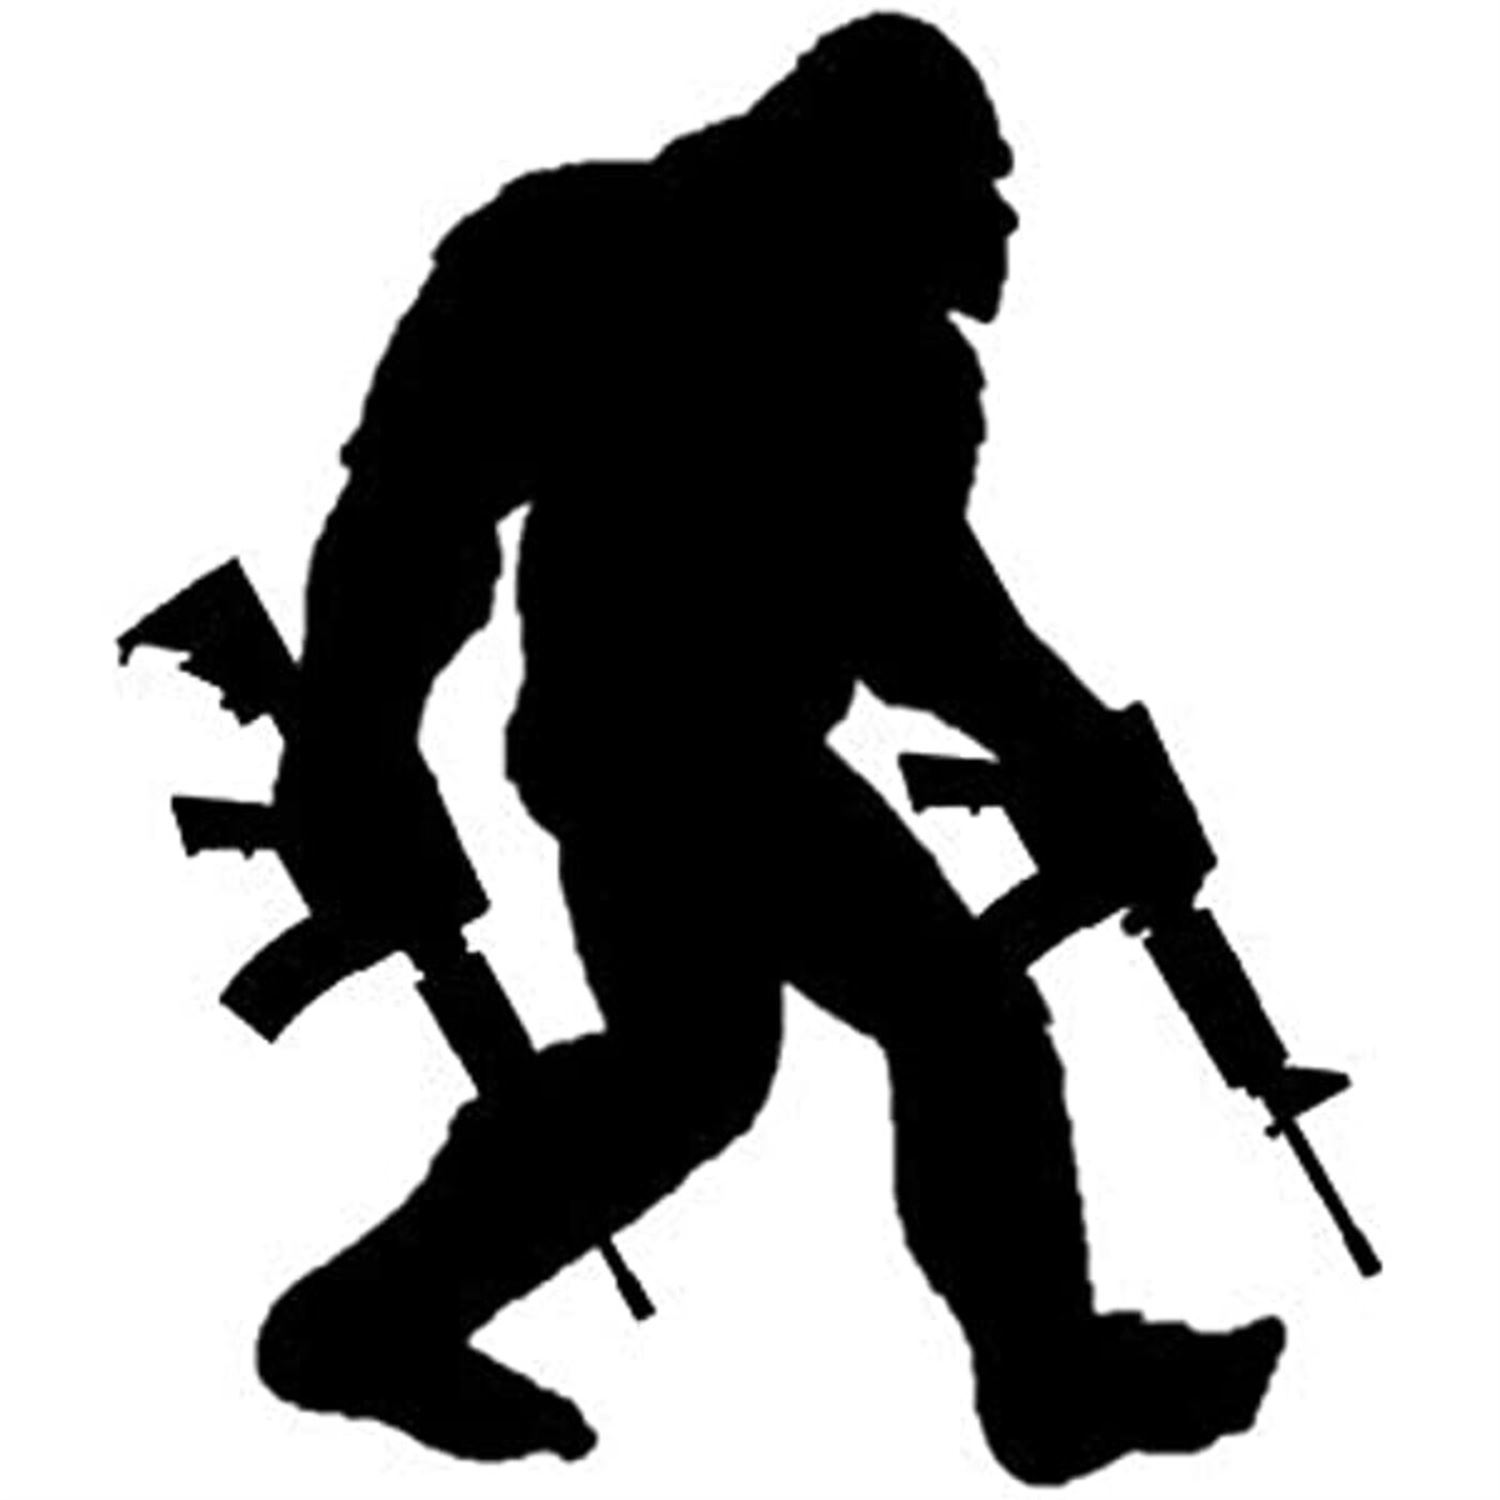 Bigfoot is real & packing heat